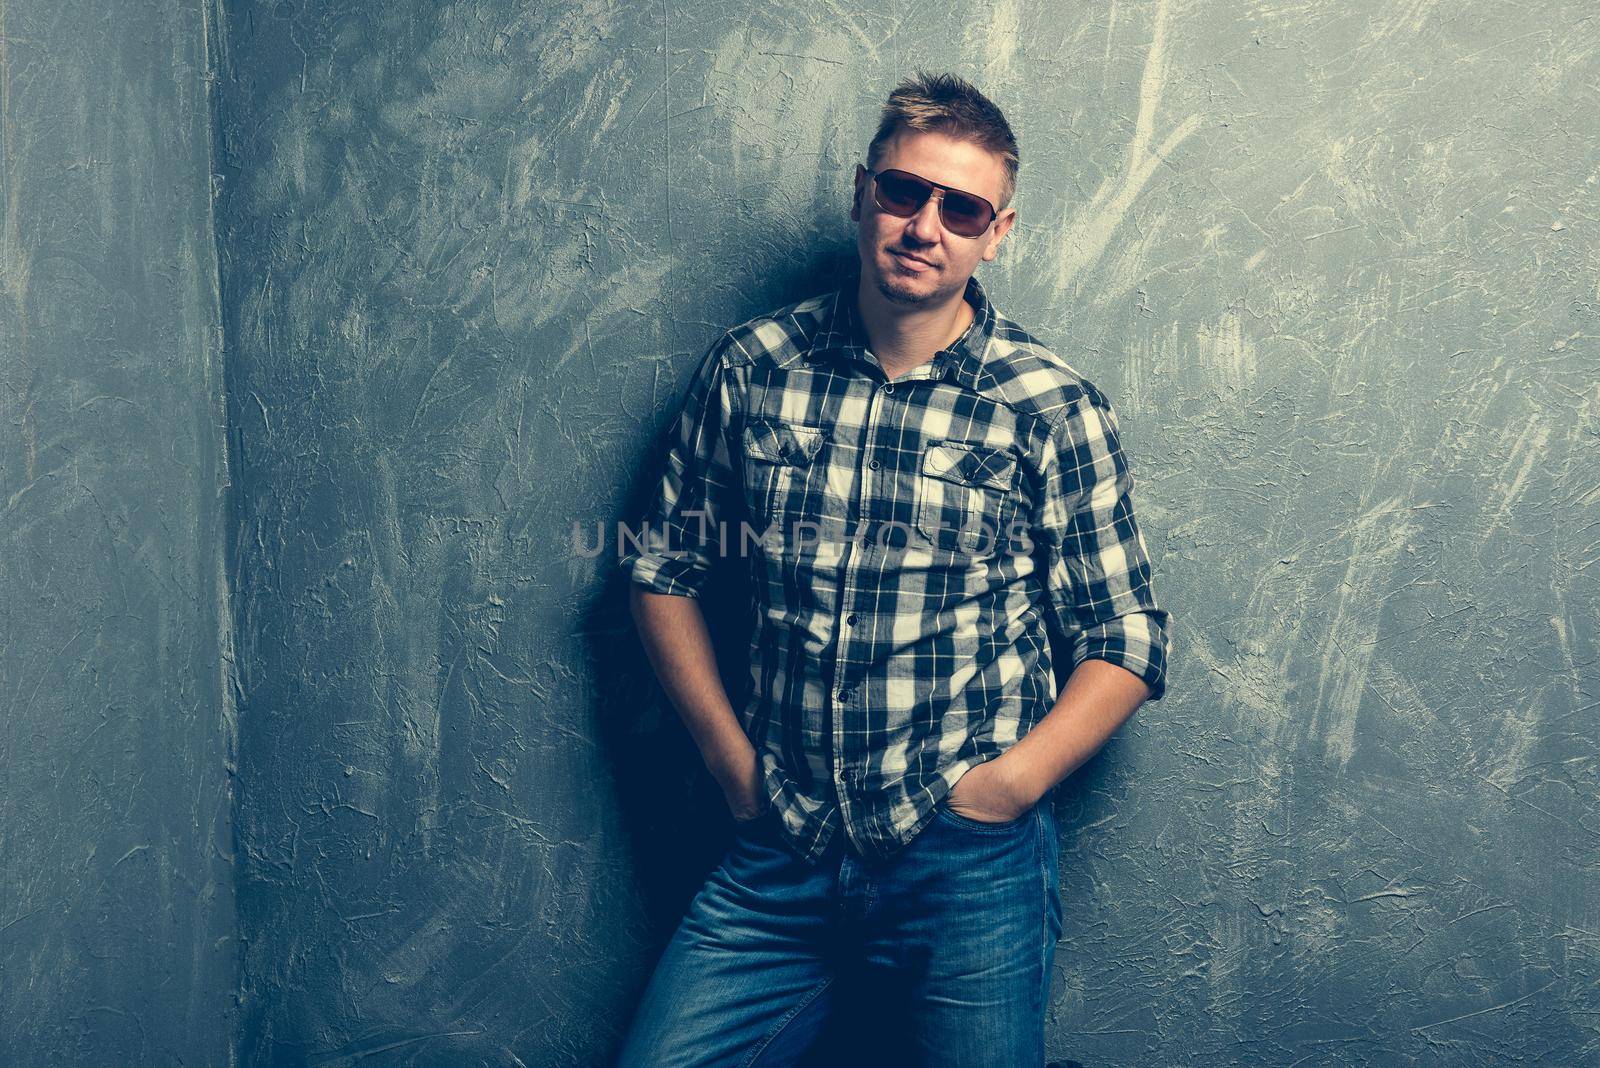 portrait of the man in sunglasses and plaid shirt